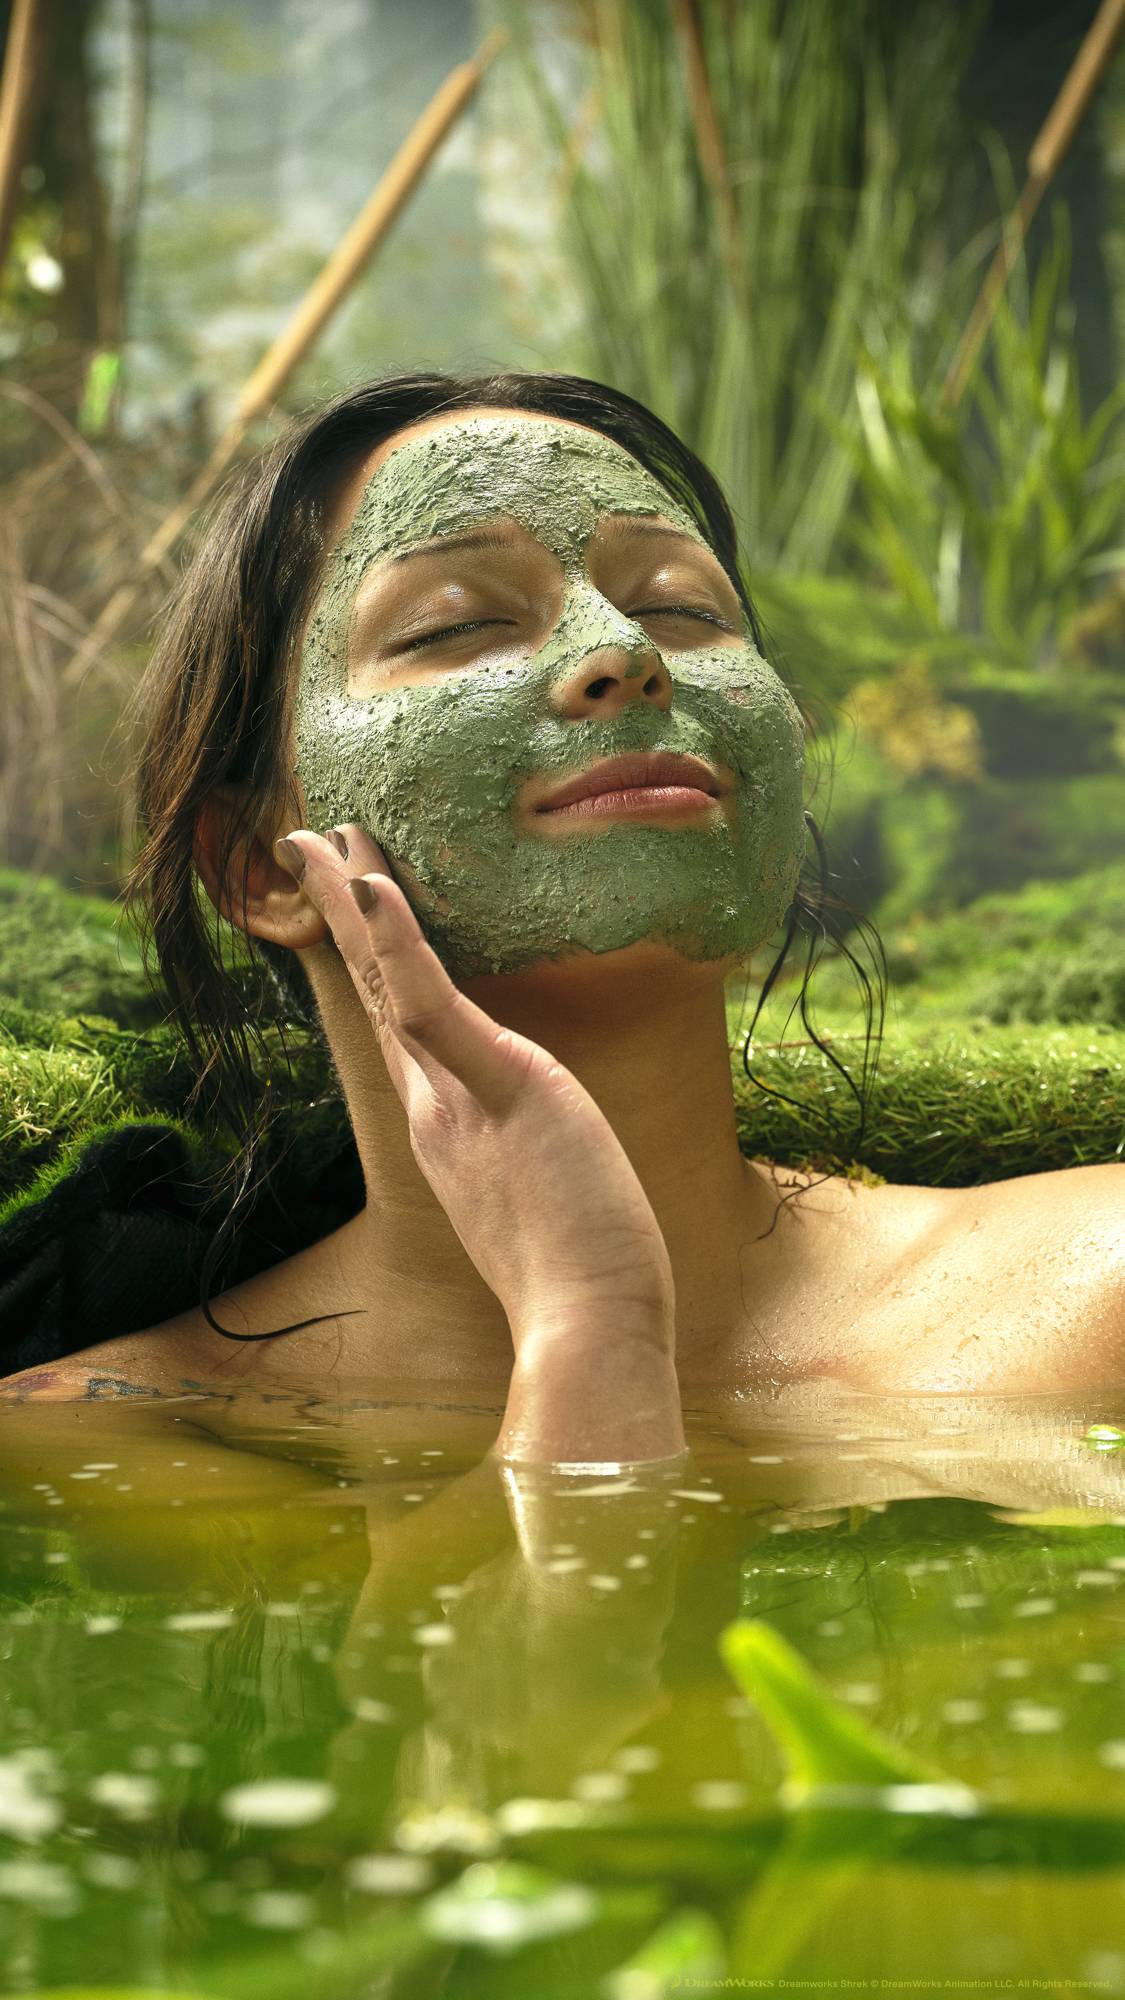 A close-up of the model's face as their eyes are closed and they are leaned back on a mossy knoll with the Shrek Pack face mask covering their face.